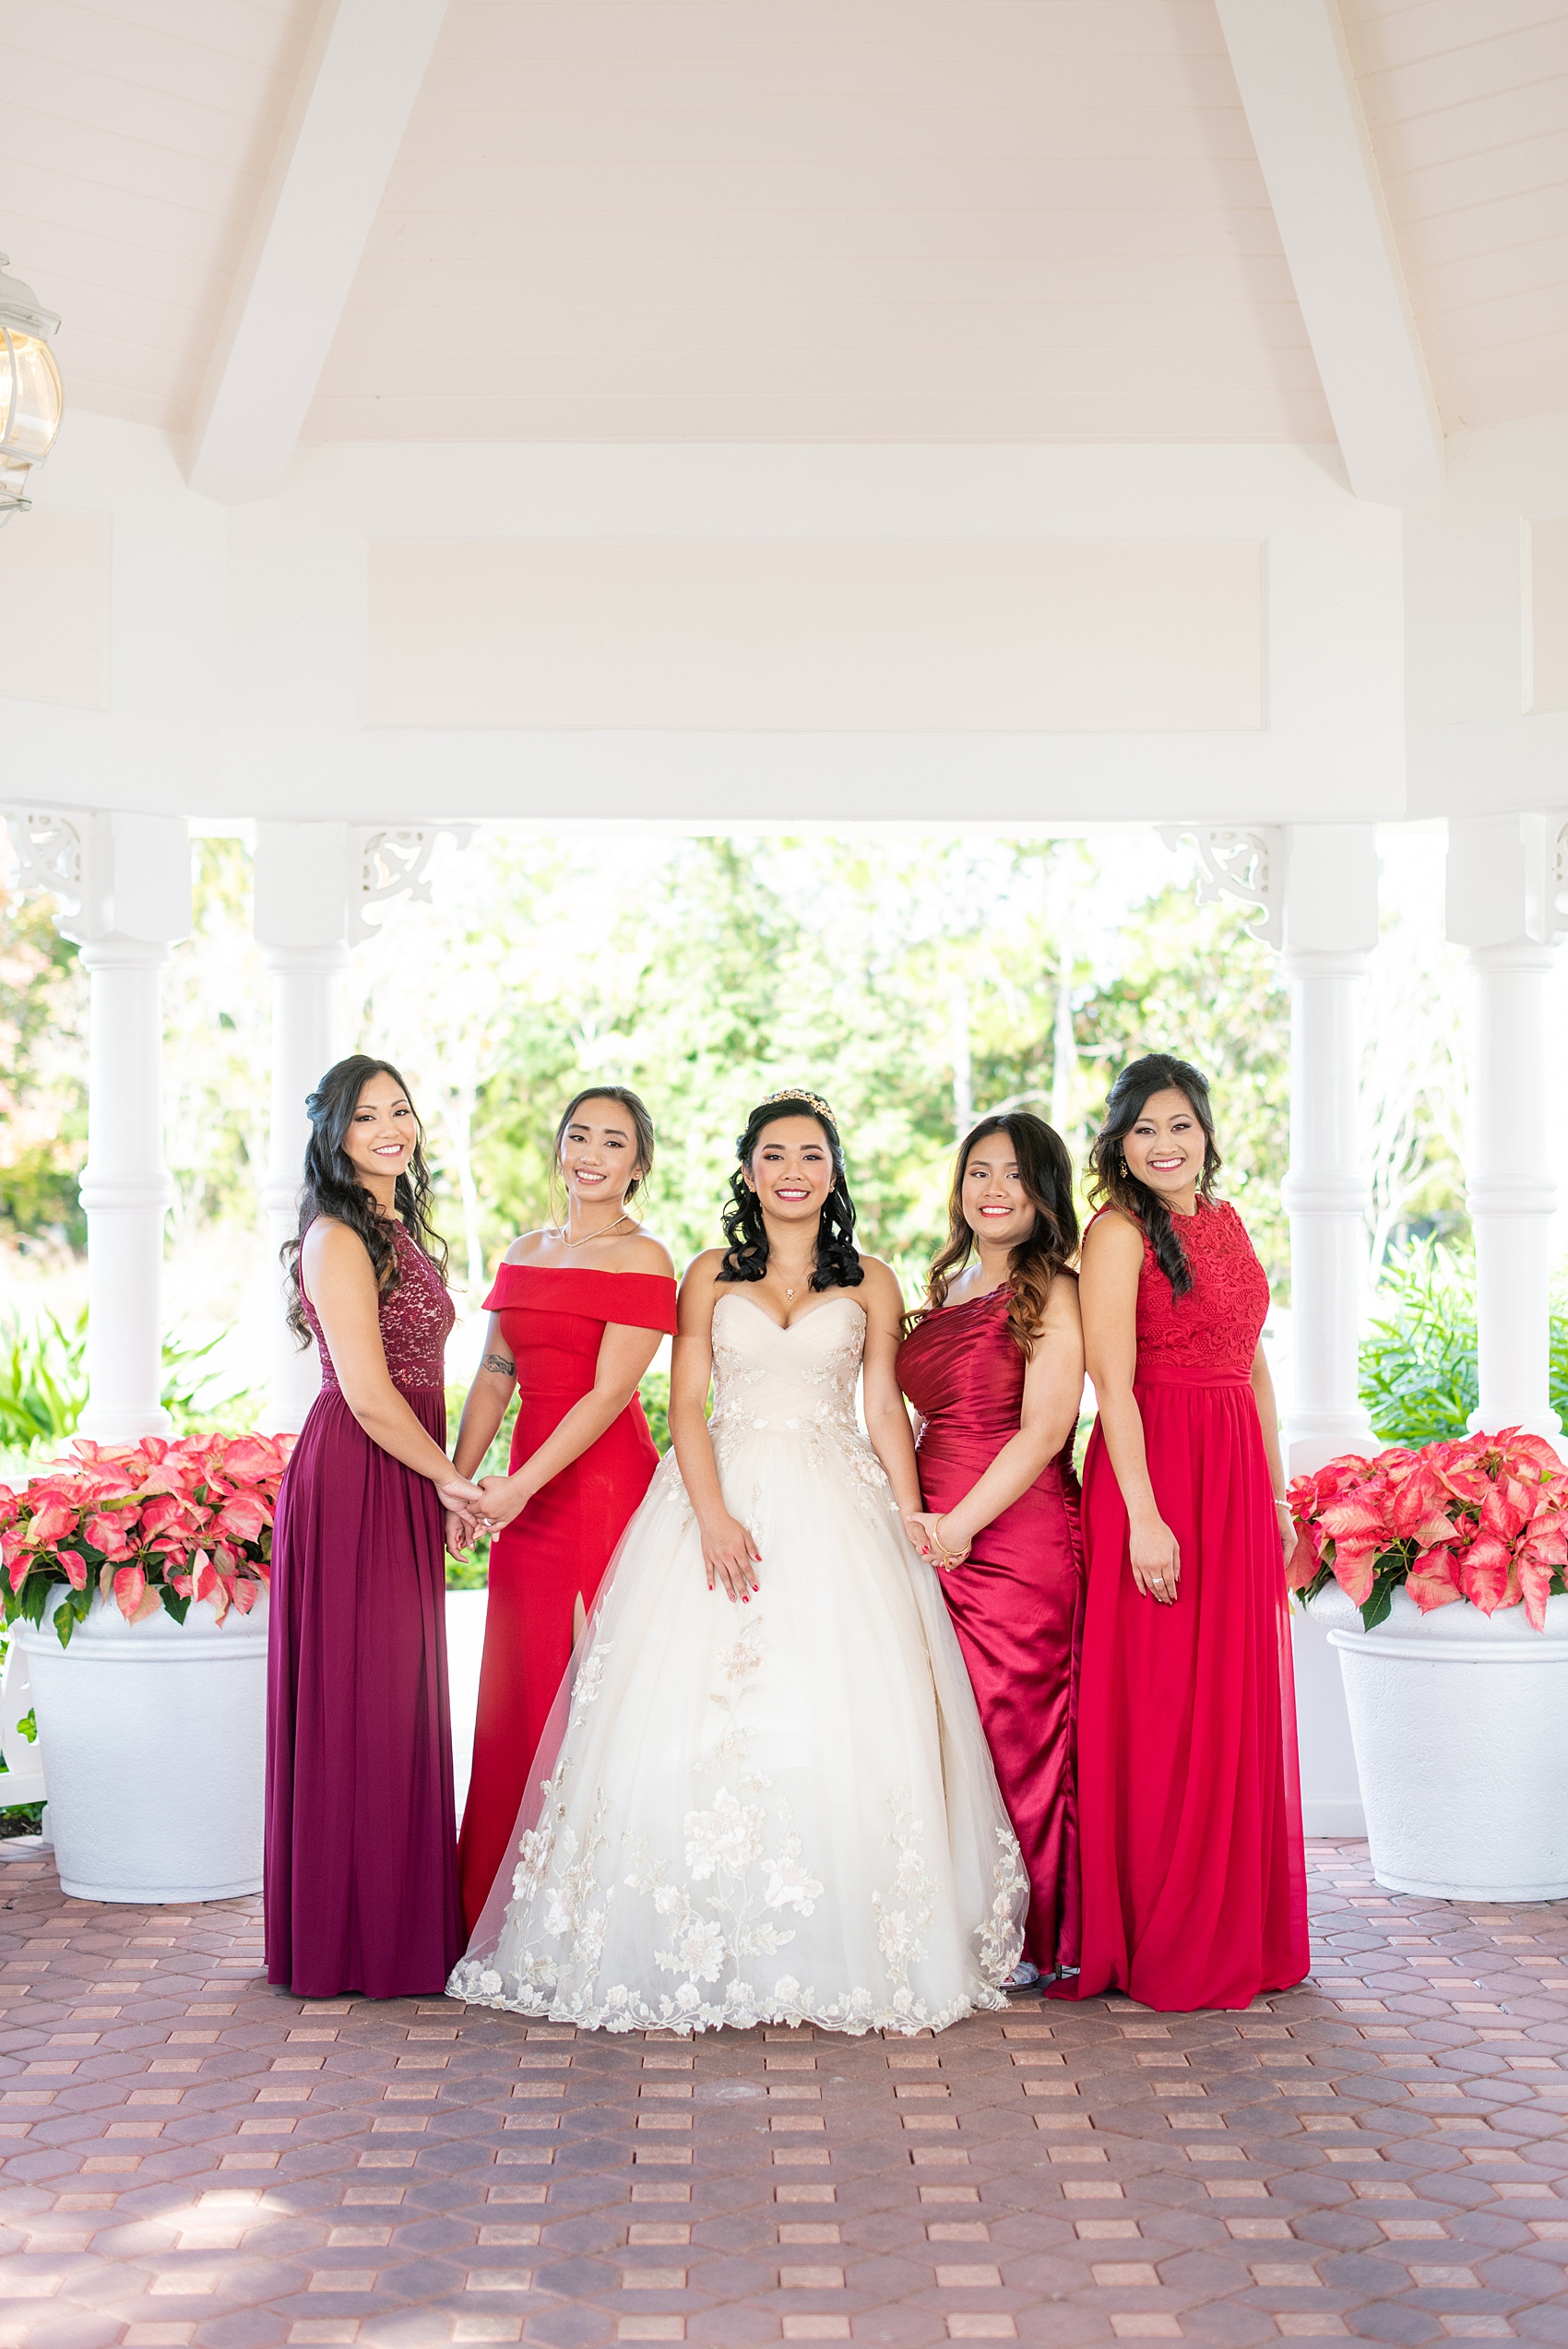 Photographs of a Walt Disney World bridal party by Mikkel Paige Photography. The bride chose the venues of the Grand Floridian, Wedding Pavilion and The Contemporary Resort for photos and fun locations. One even overlooked the Magic Kingdom Park! Their dream wedding included red details: the bridesmaids wore mismatched dresses and carried rose bouquets. #disneywedding #disneybride #waltdisneyworld #DisneyWorldWedding #BeautyandtheBeast #redrosewedding